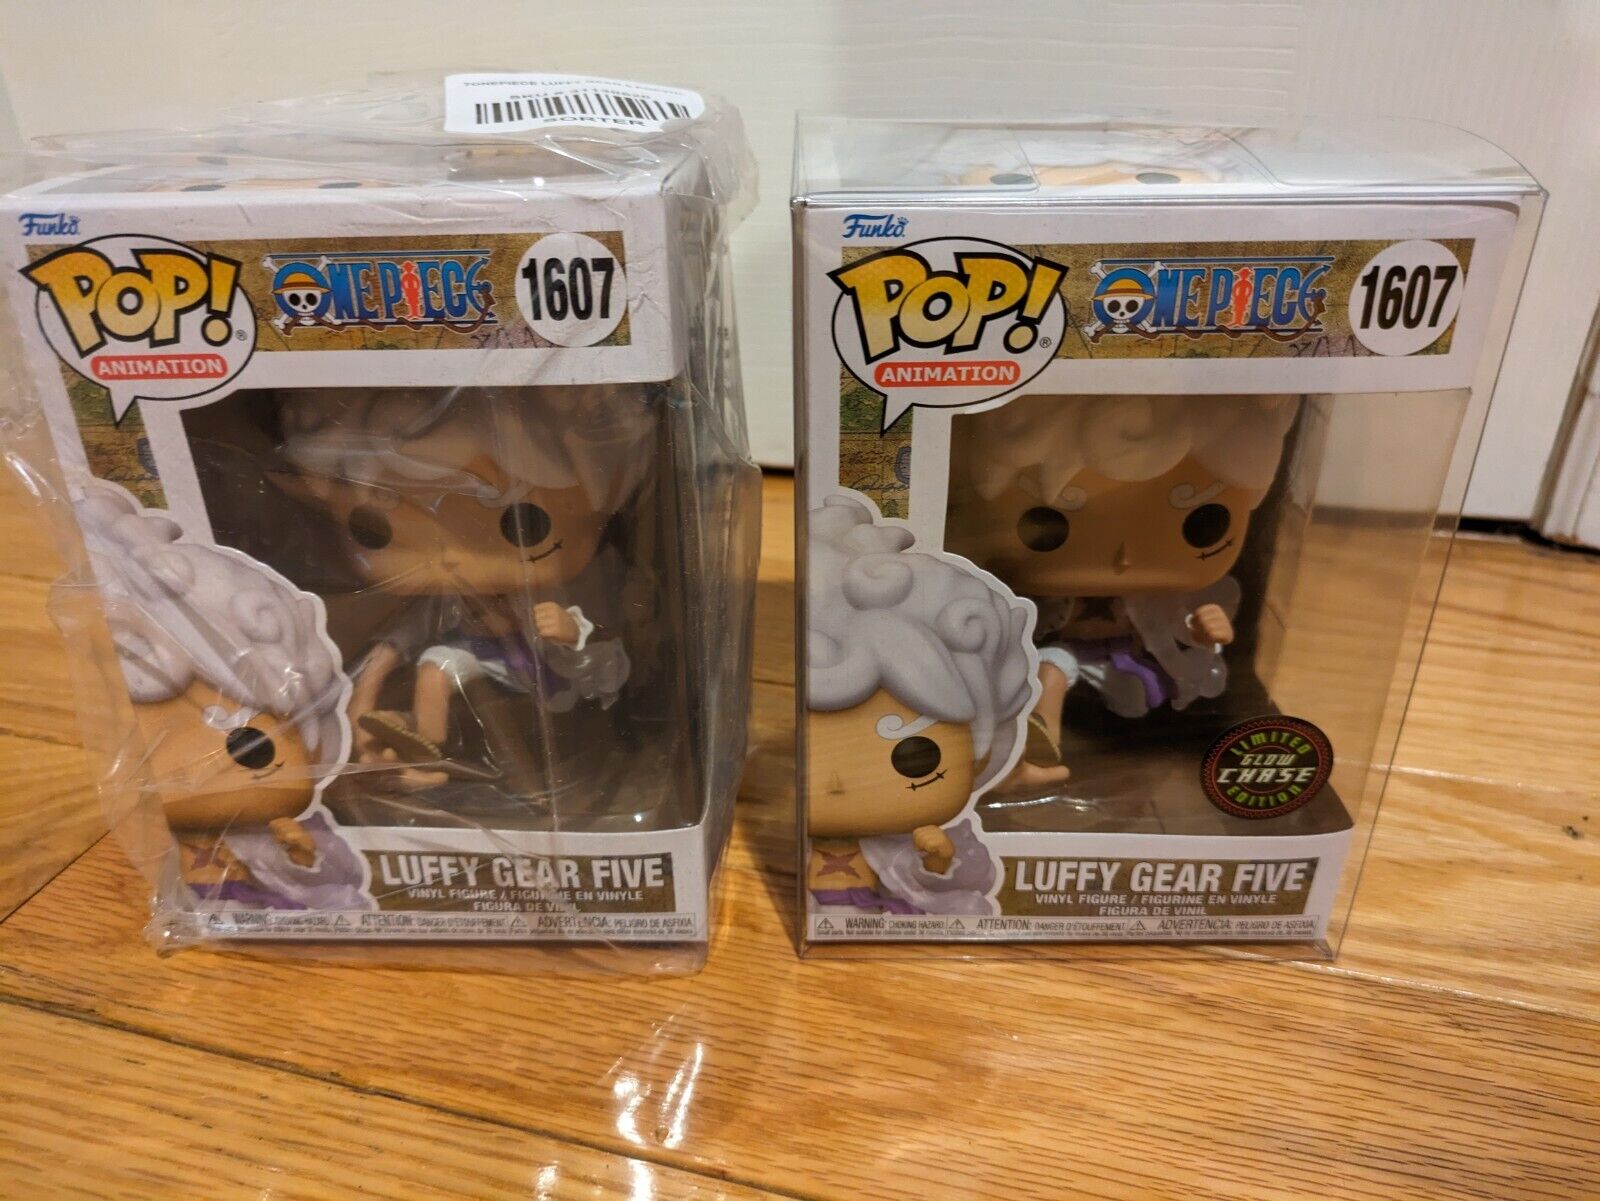 Funko Pop Luffy Gear 5 One Piece GITD GLOW CHASE + Common #1607 + Protector